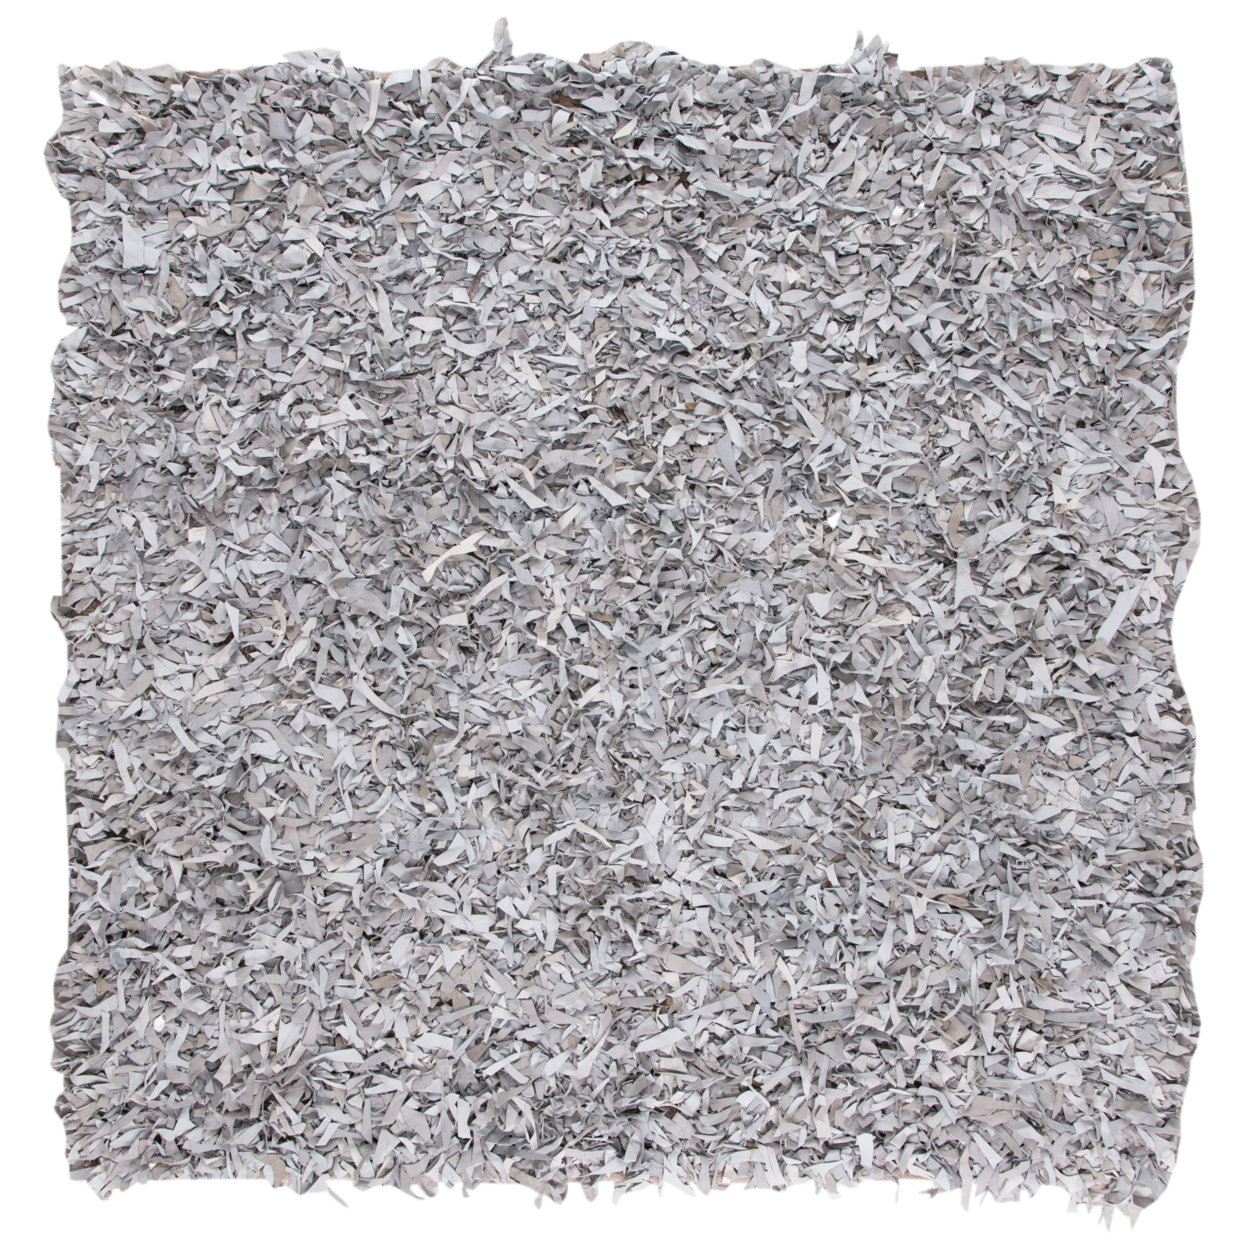 SAFAVIEH Leather Shag LSG511C Hand-knotted White Rug - 6' Square